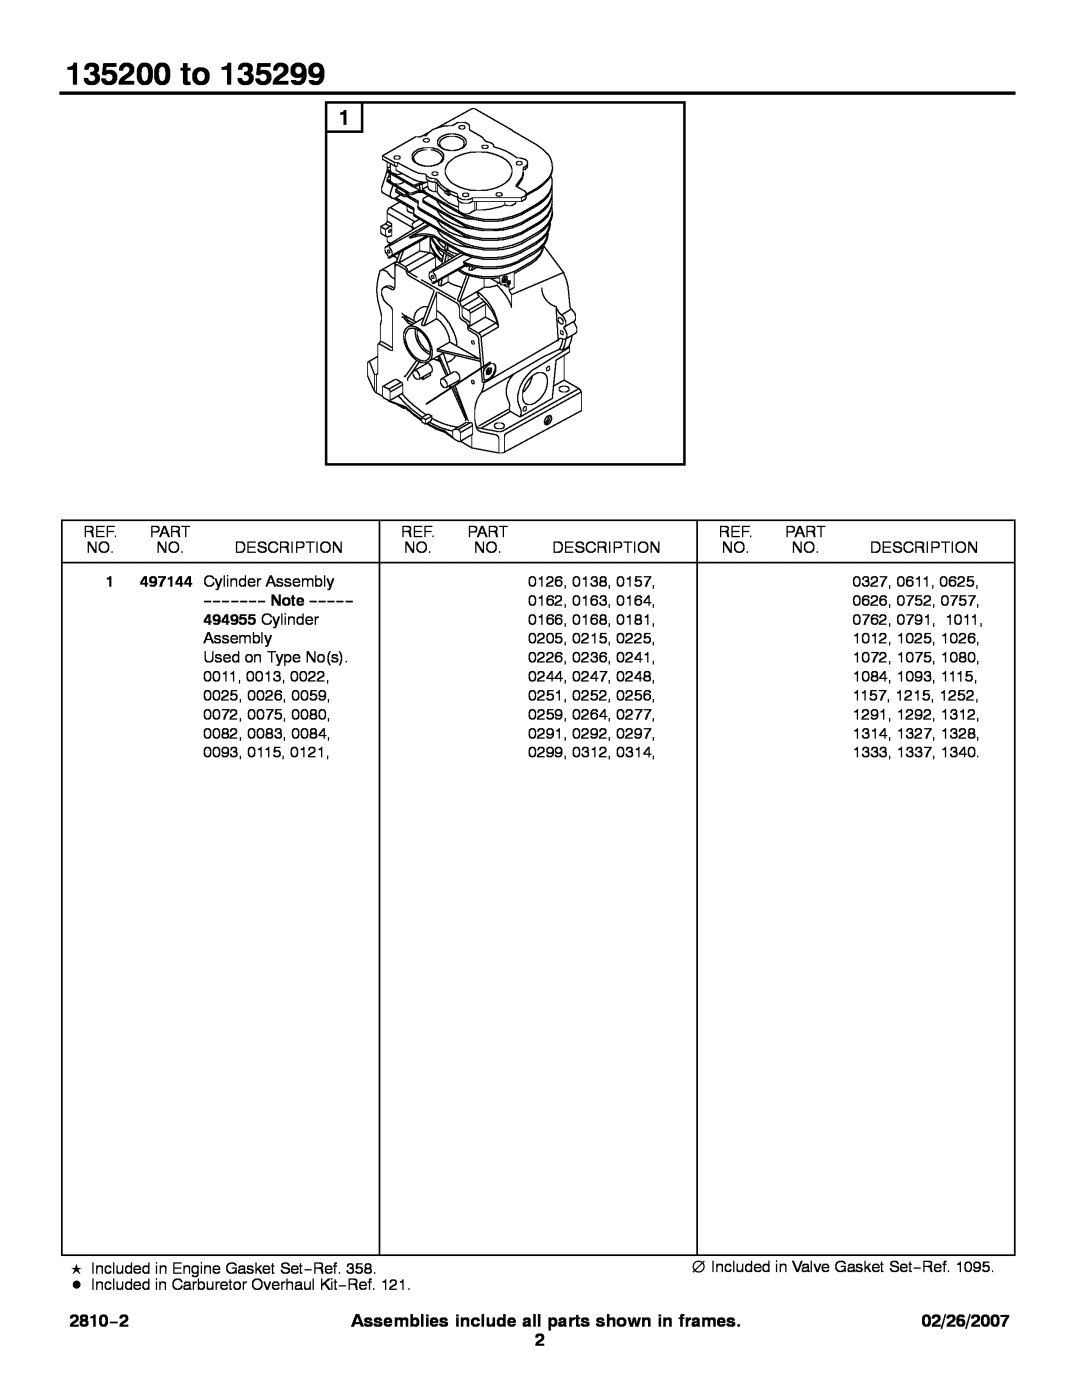 Briggs & Stratton service manual 135200 to, 2810−2, Assemblies include all parts shown in frames, 02/26/2007 